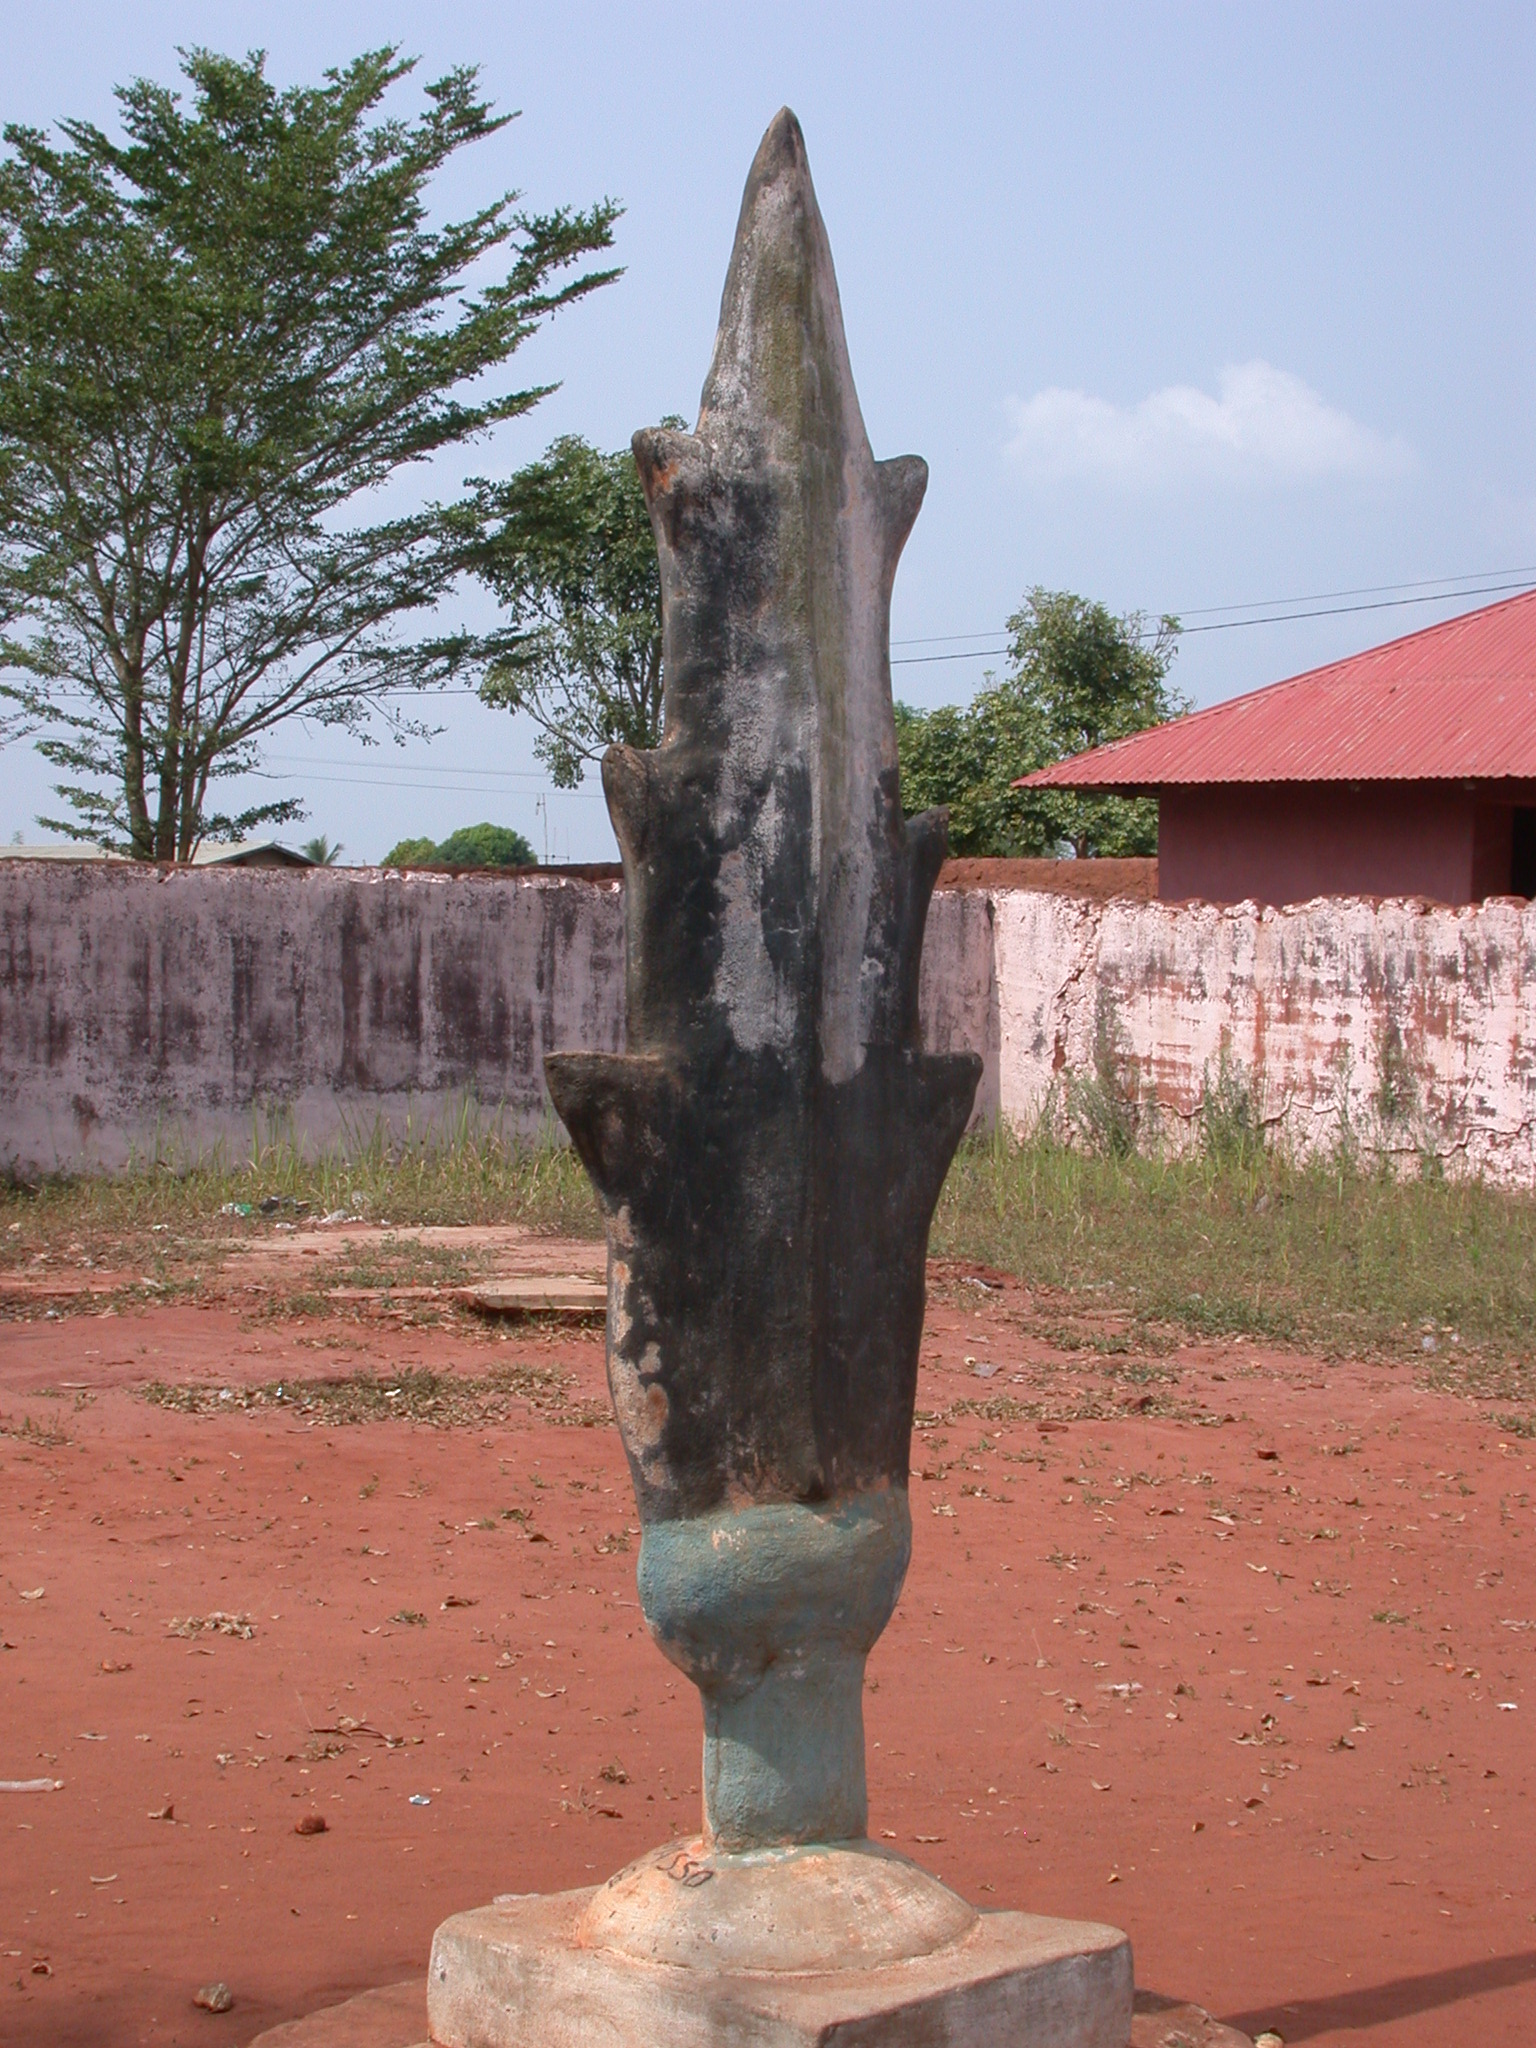 Sculpture in Courtyard, Palace of Crown Prince Agonglo, Abomey, Benin